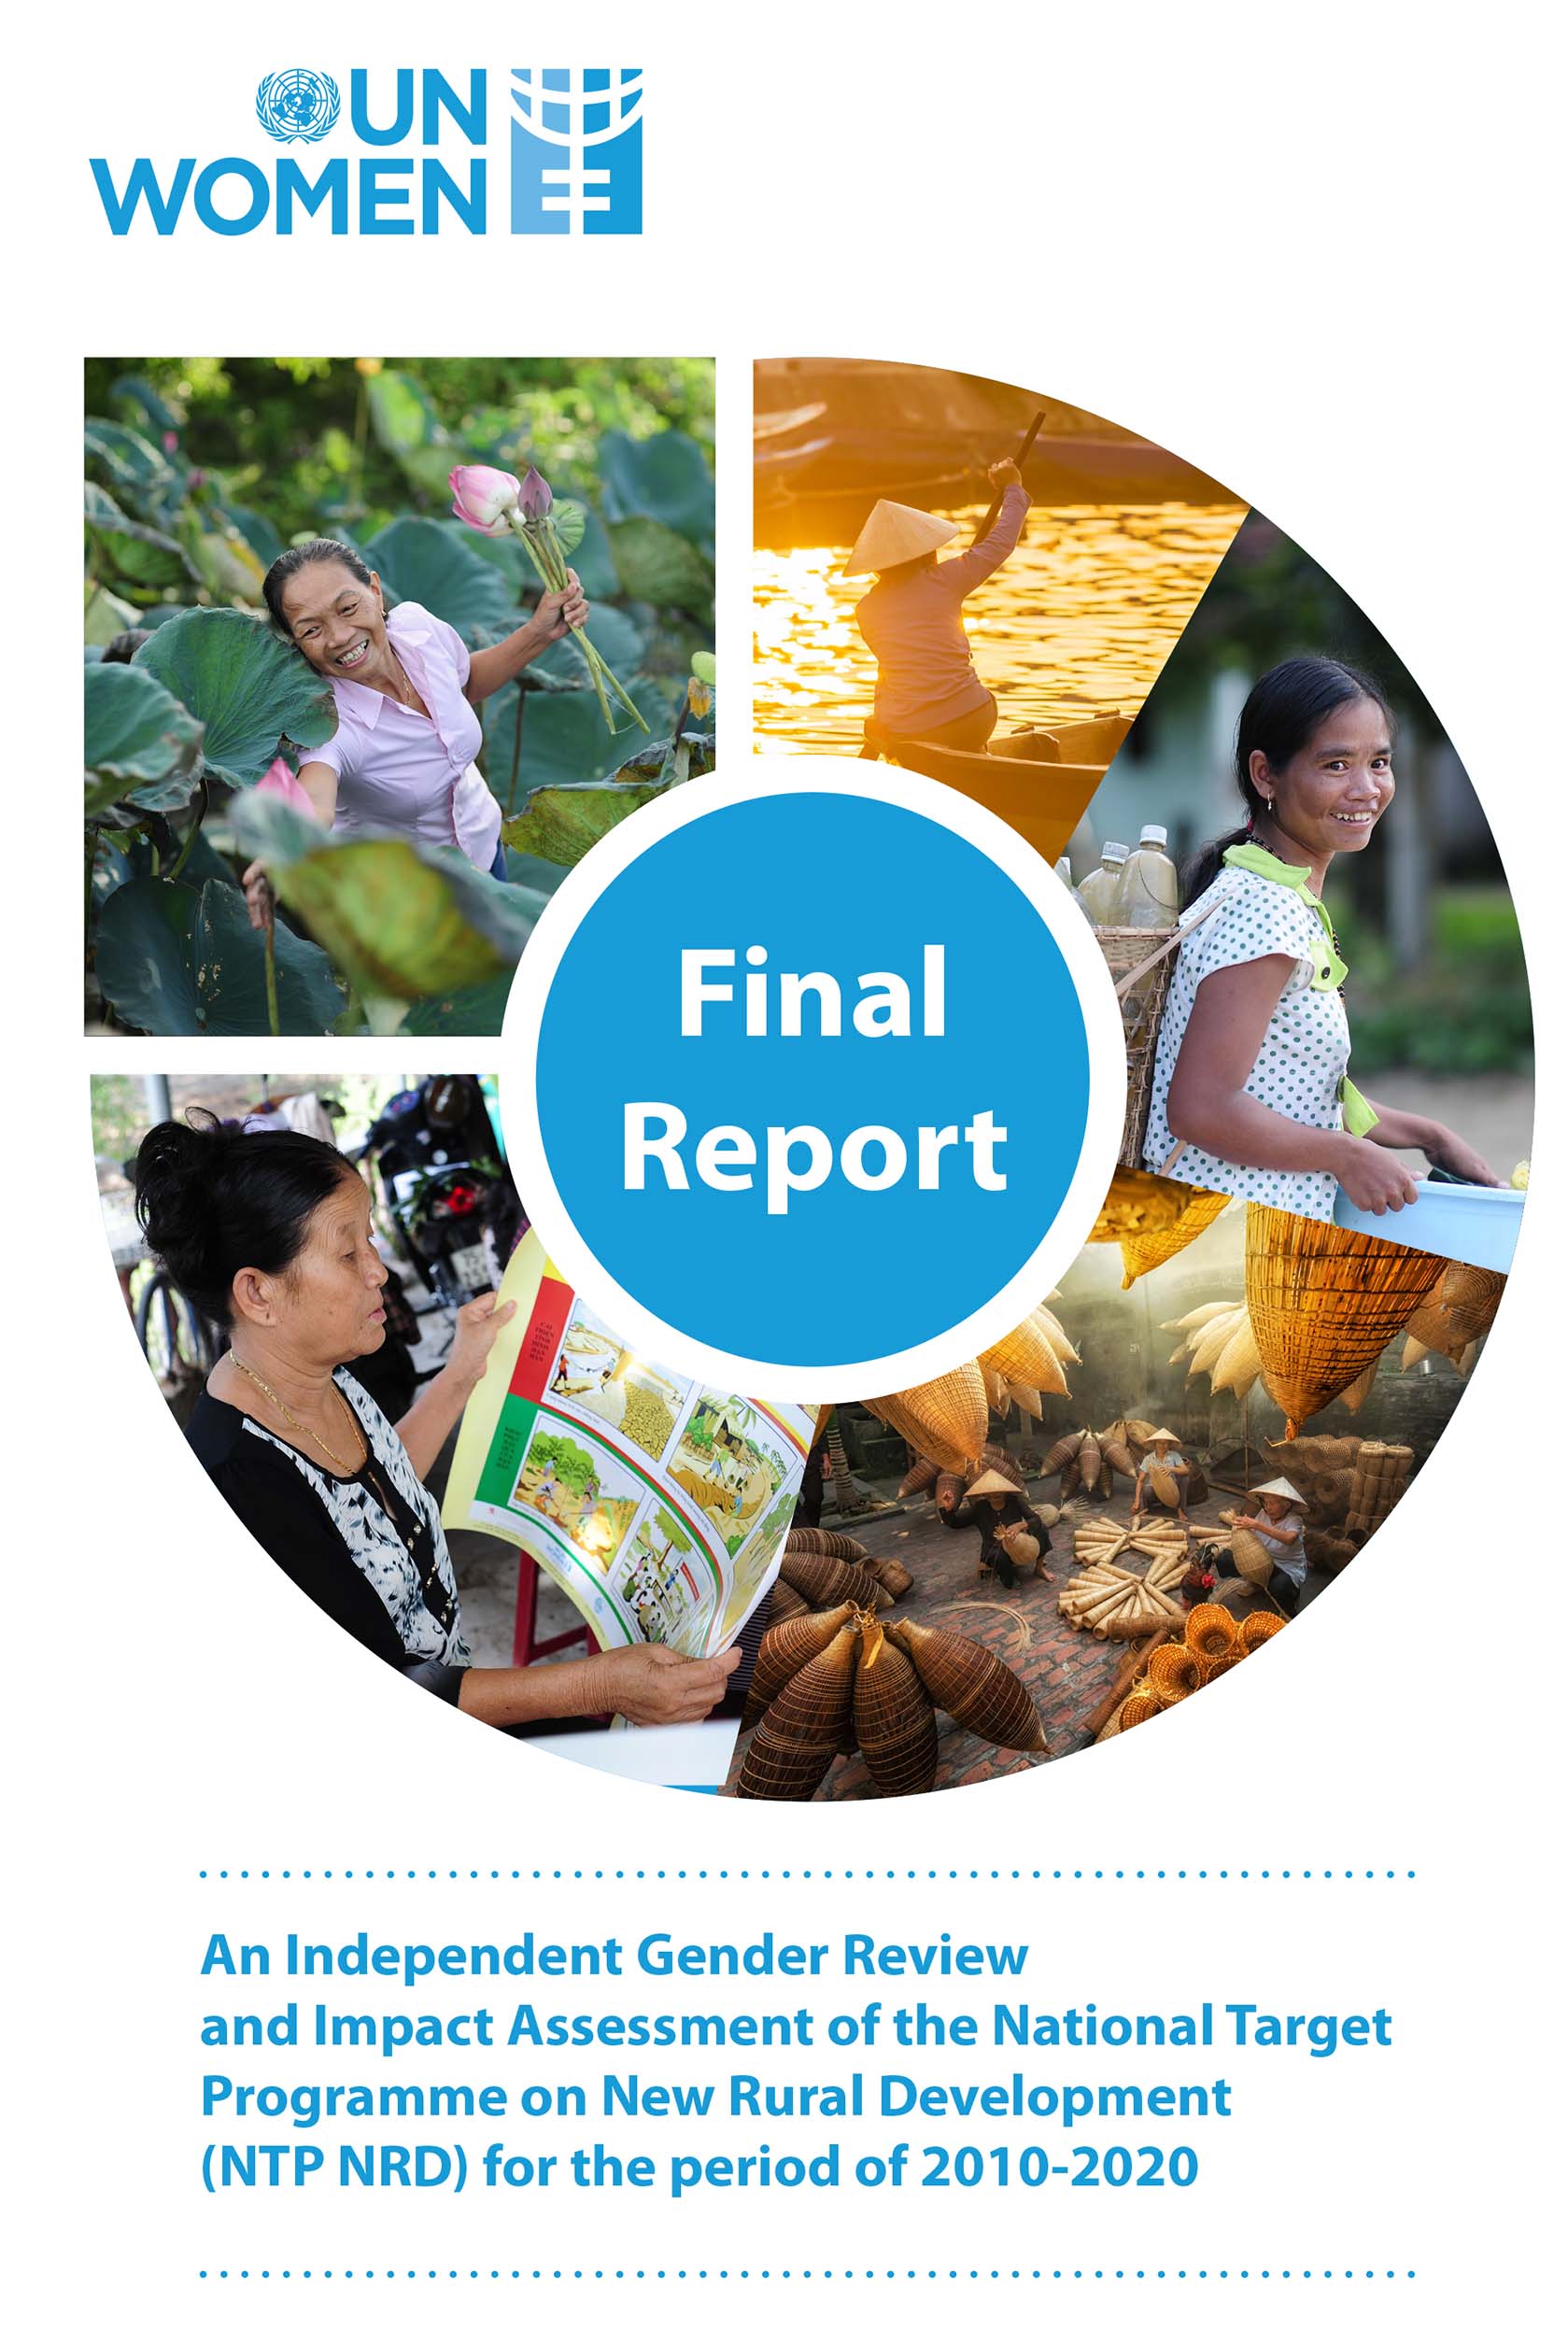 [Final Report] An Independent Gender Review and Impact Assessment of the National Target Programme on New Rural Development for the period of 2010-2020